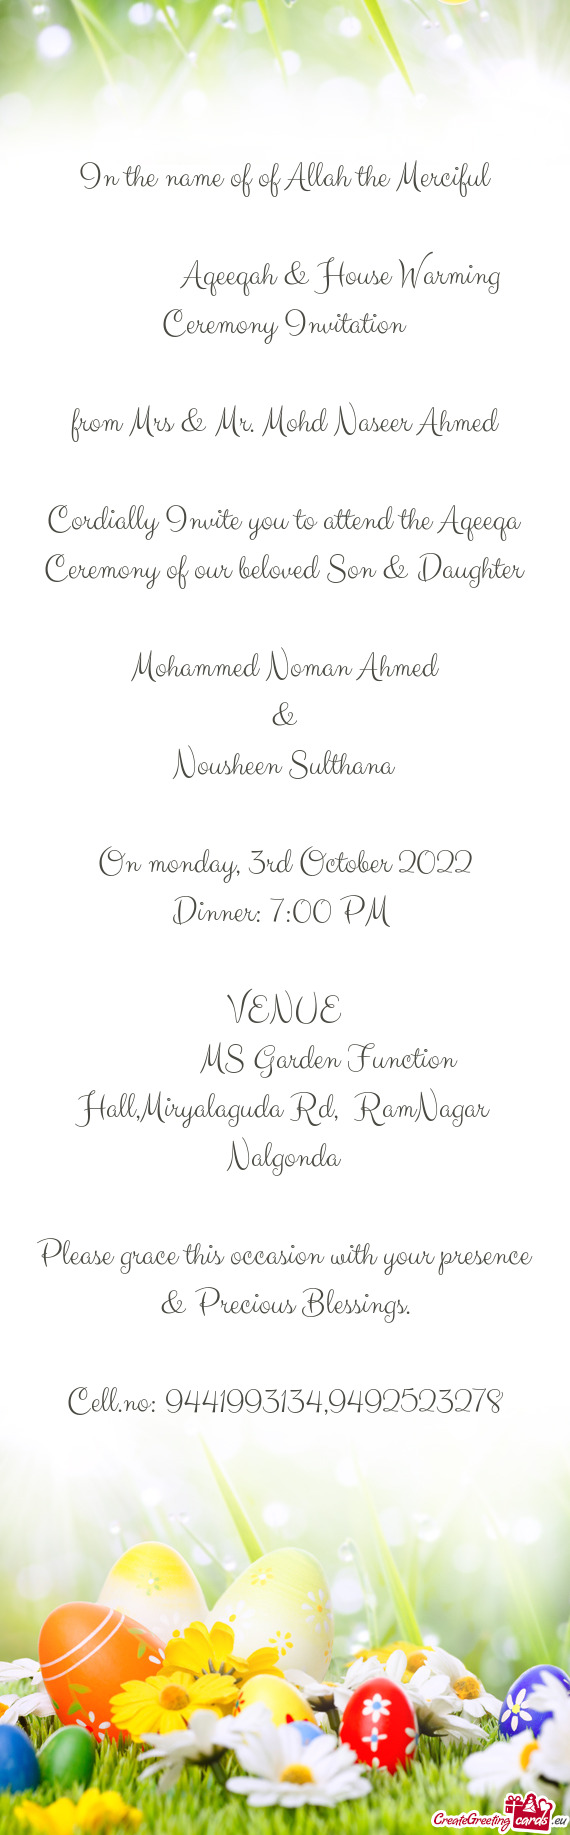 In the name of of Allah the Merciful     Aqeeqah & House Warming Ceremony Invitation